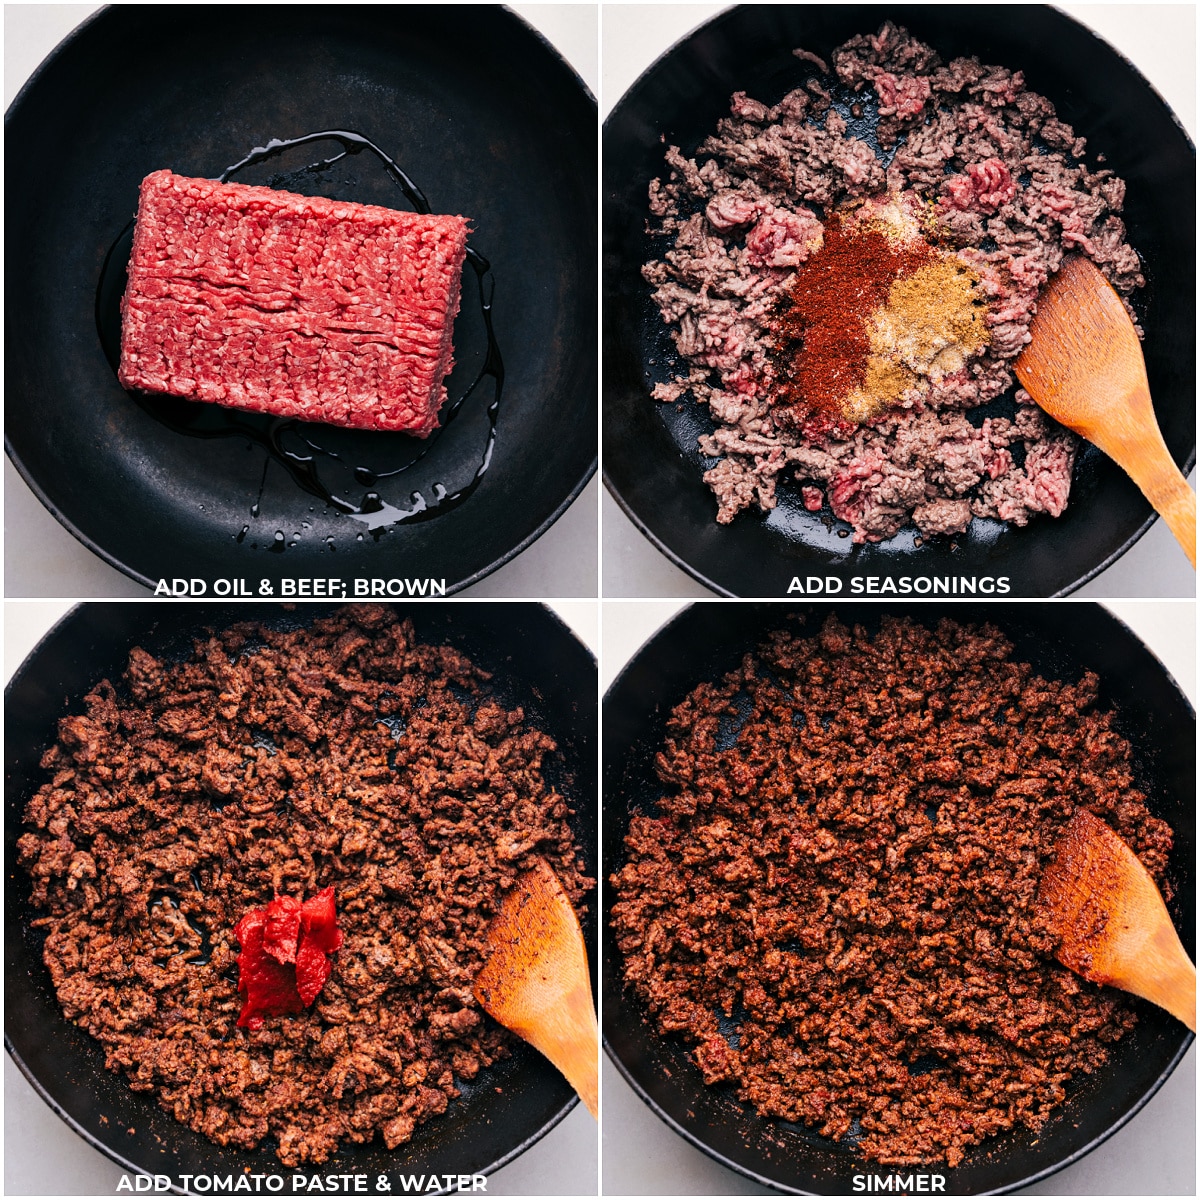 Beef, seasonings, tomato paste, and water being added to the skillet for this Taco Meat Recipe.